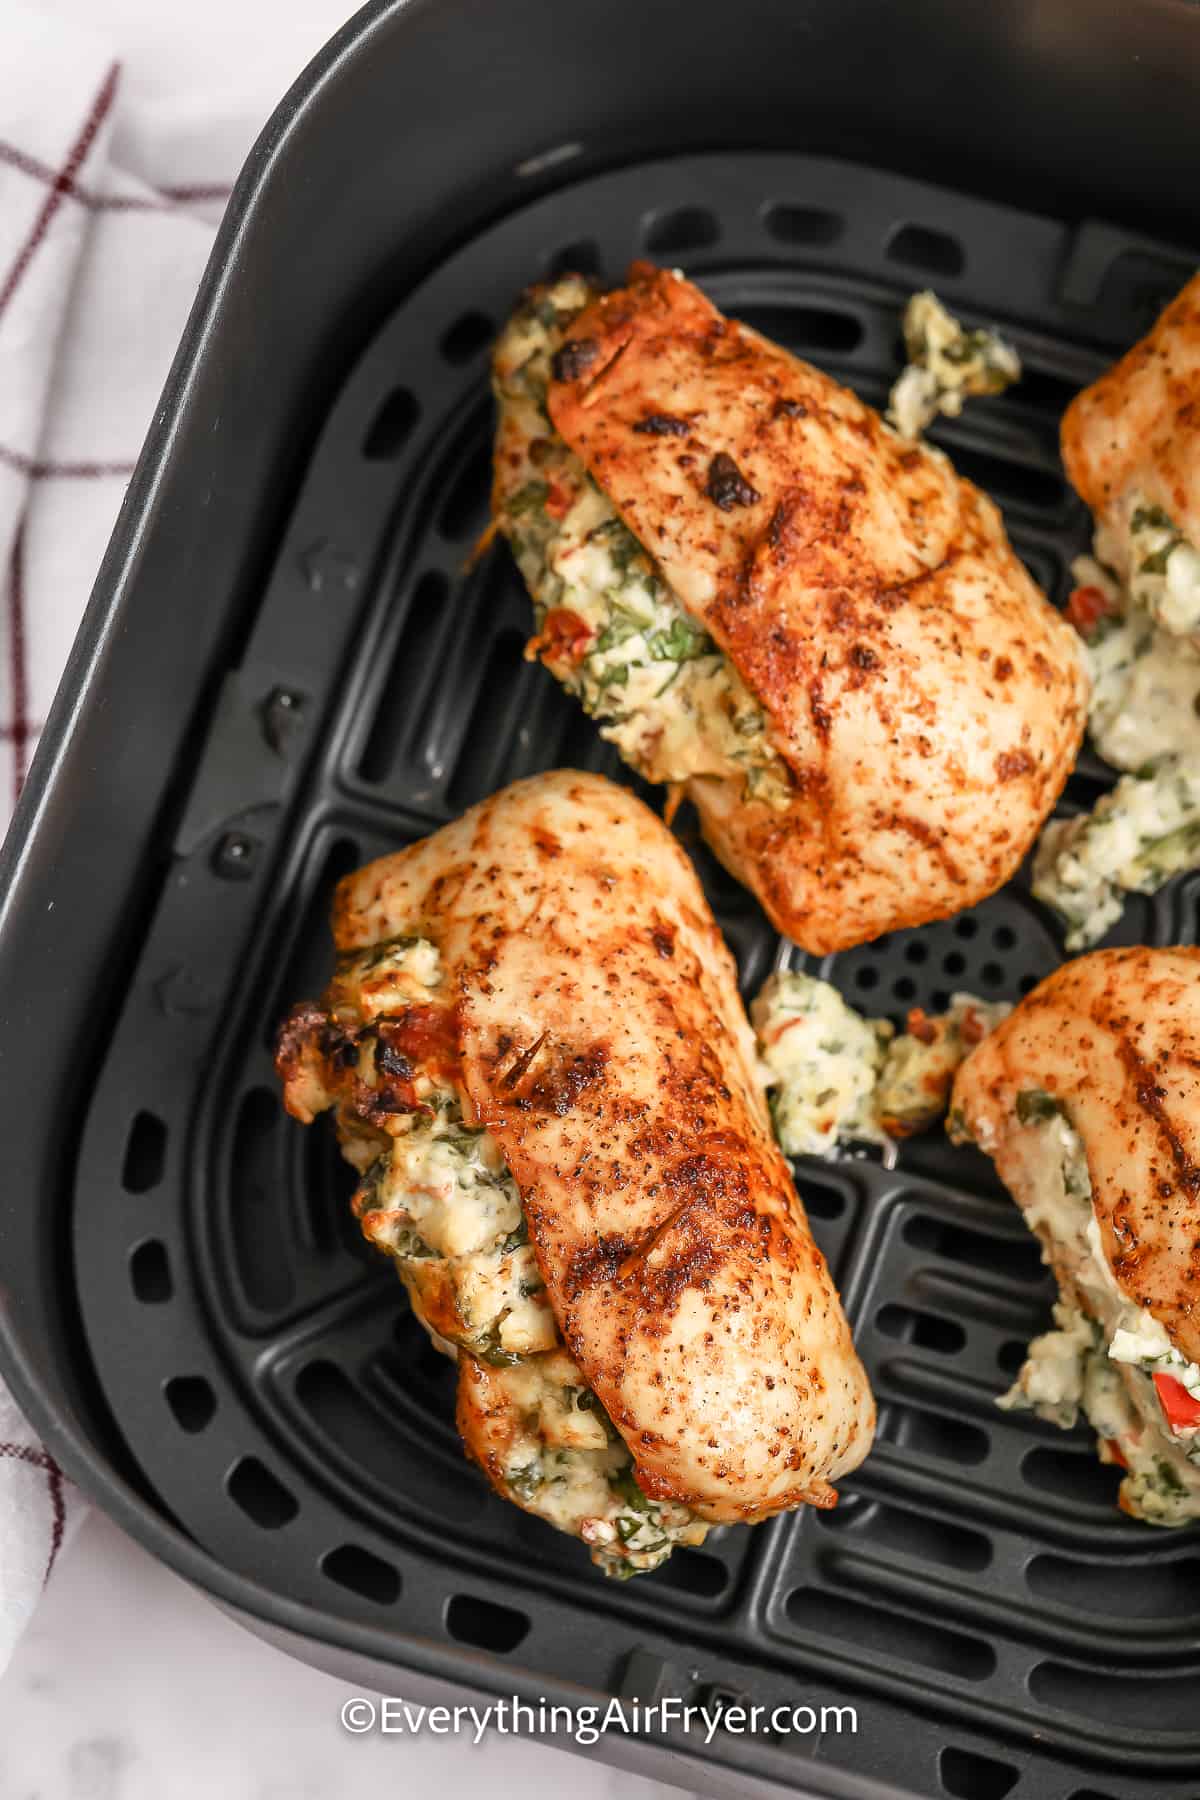 Cooked Stuffed Chicken Breasts in an air fryer basket